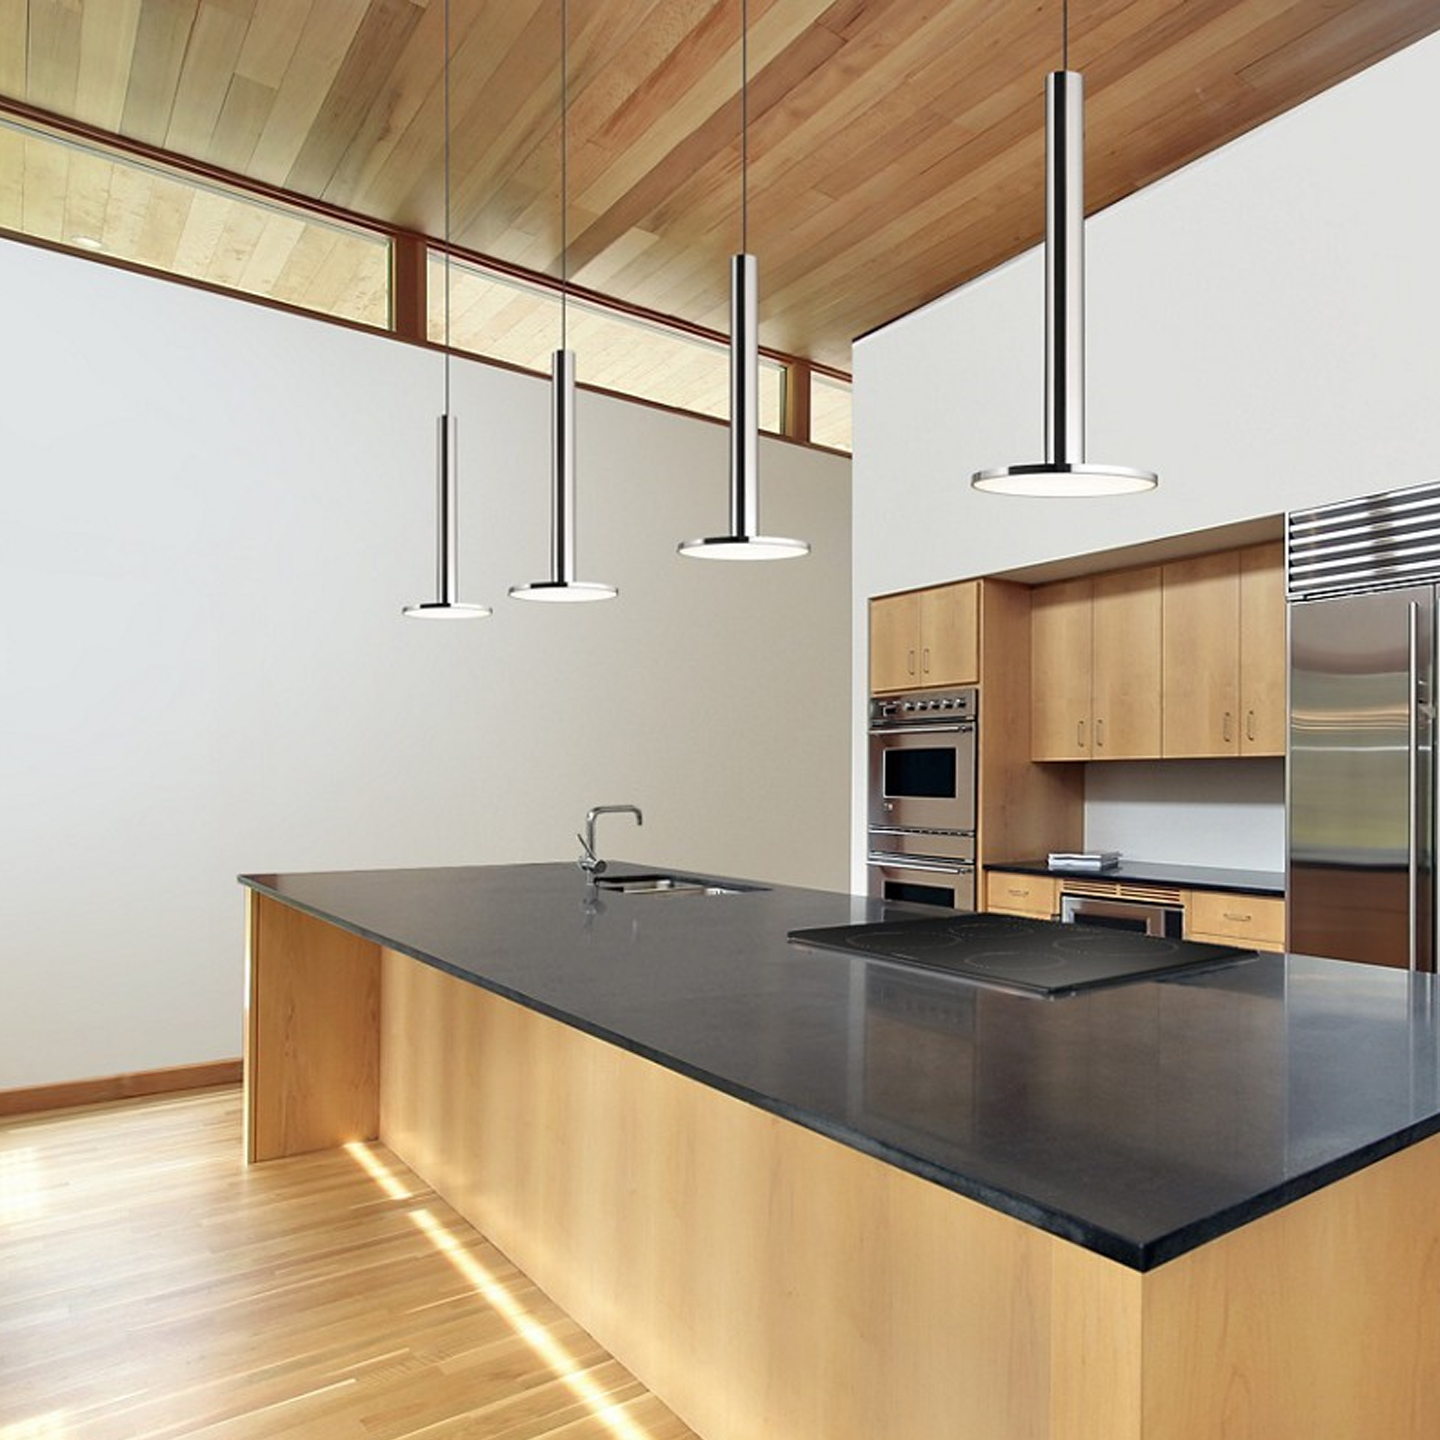 Haworth Cielo XL Lighting in steel color hanging from home ceiling above kitchen with black table and wood cabinets